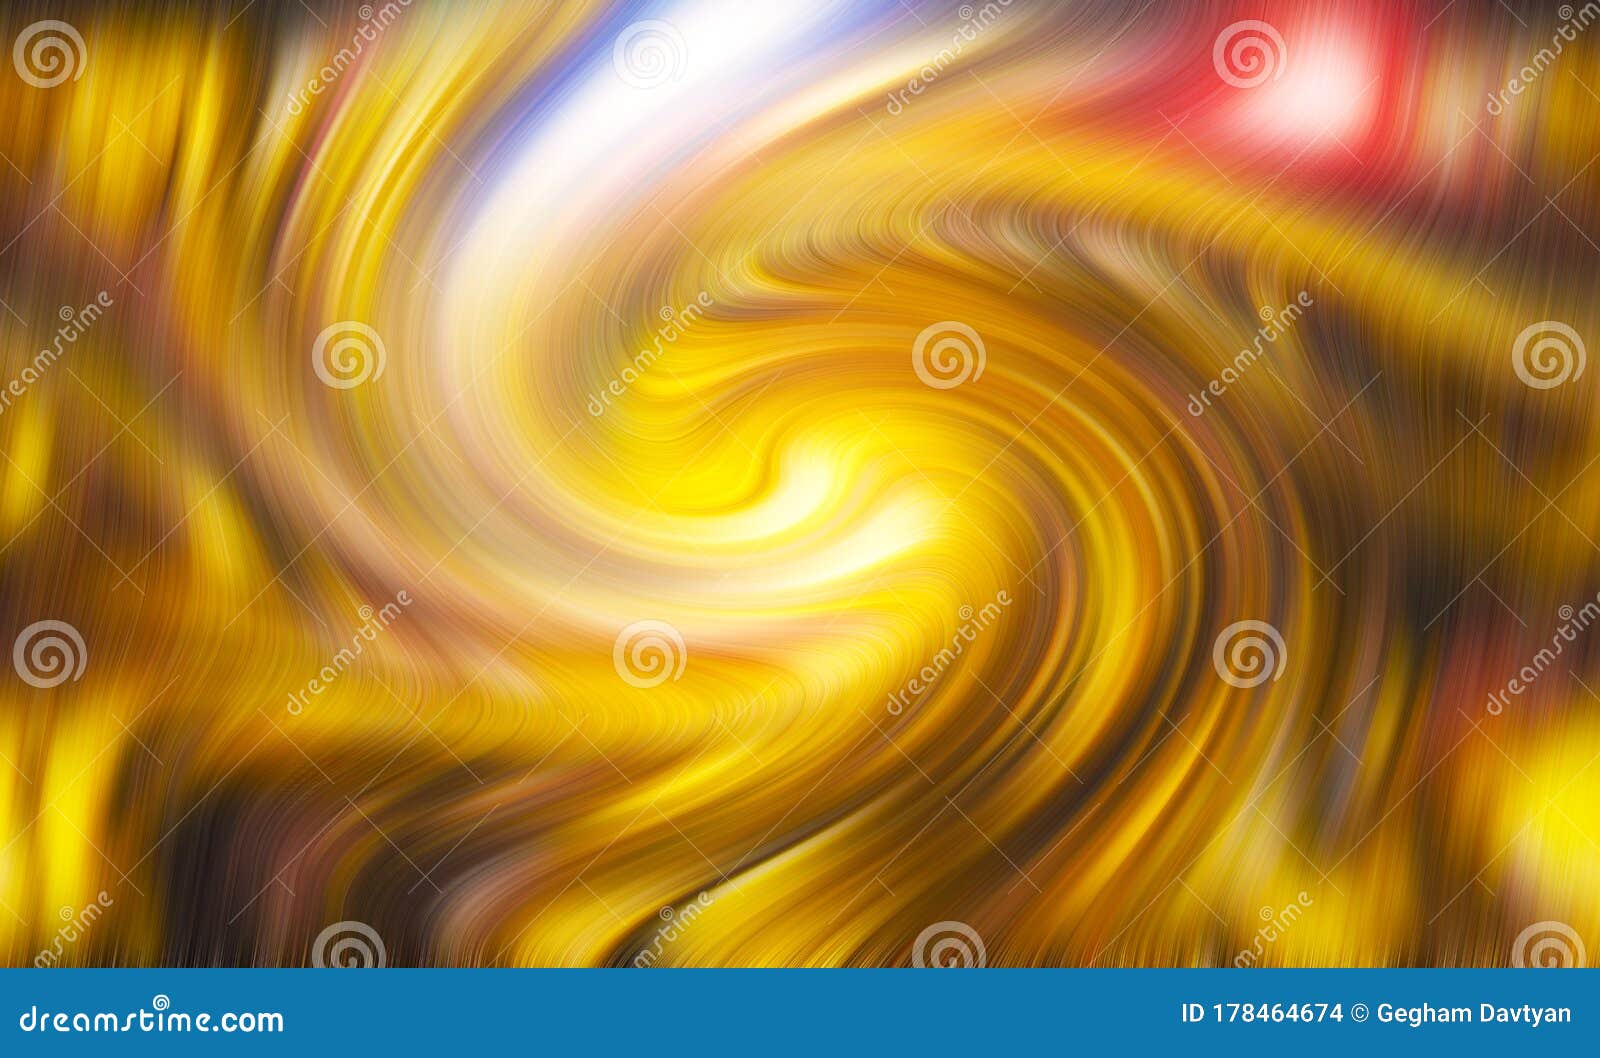 Abstract Background With Colorful Waves Abstract Colorful Background Golden Abstract Background Hd Golden Wallpaper Colored Wa Stock Photo Image Of Background Fractal 178464674